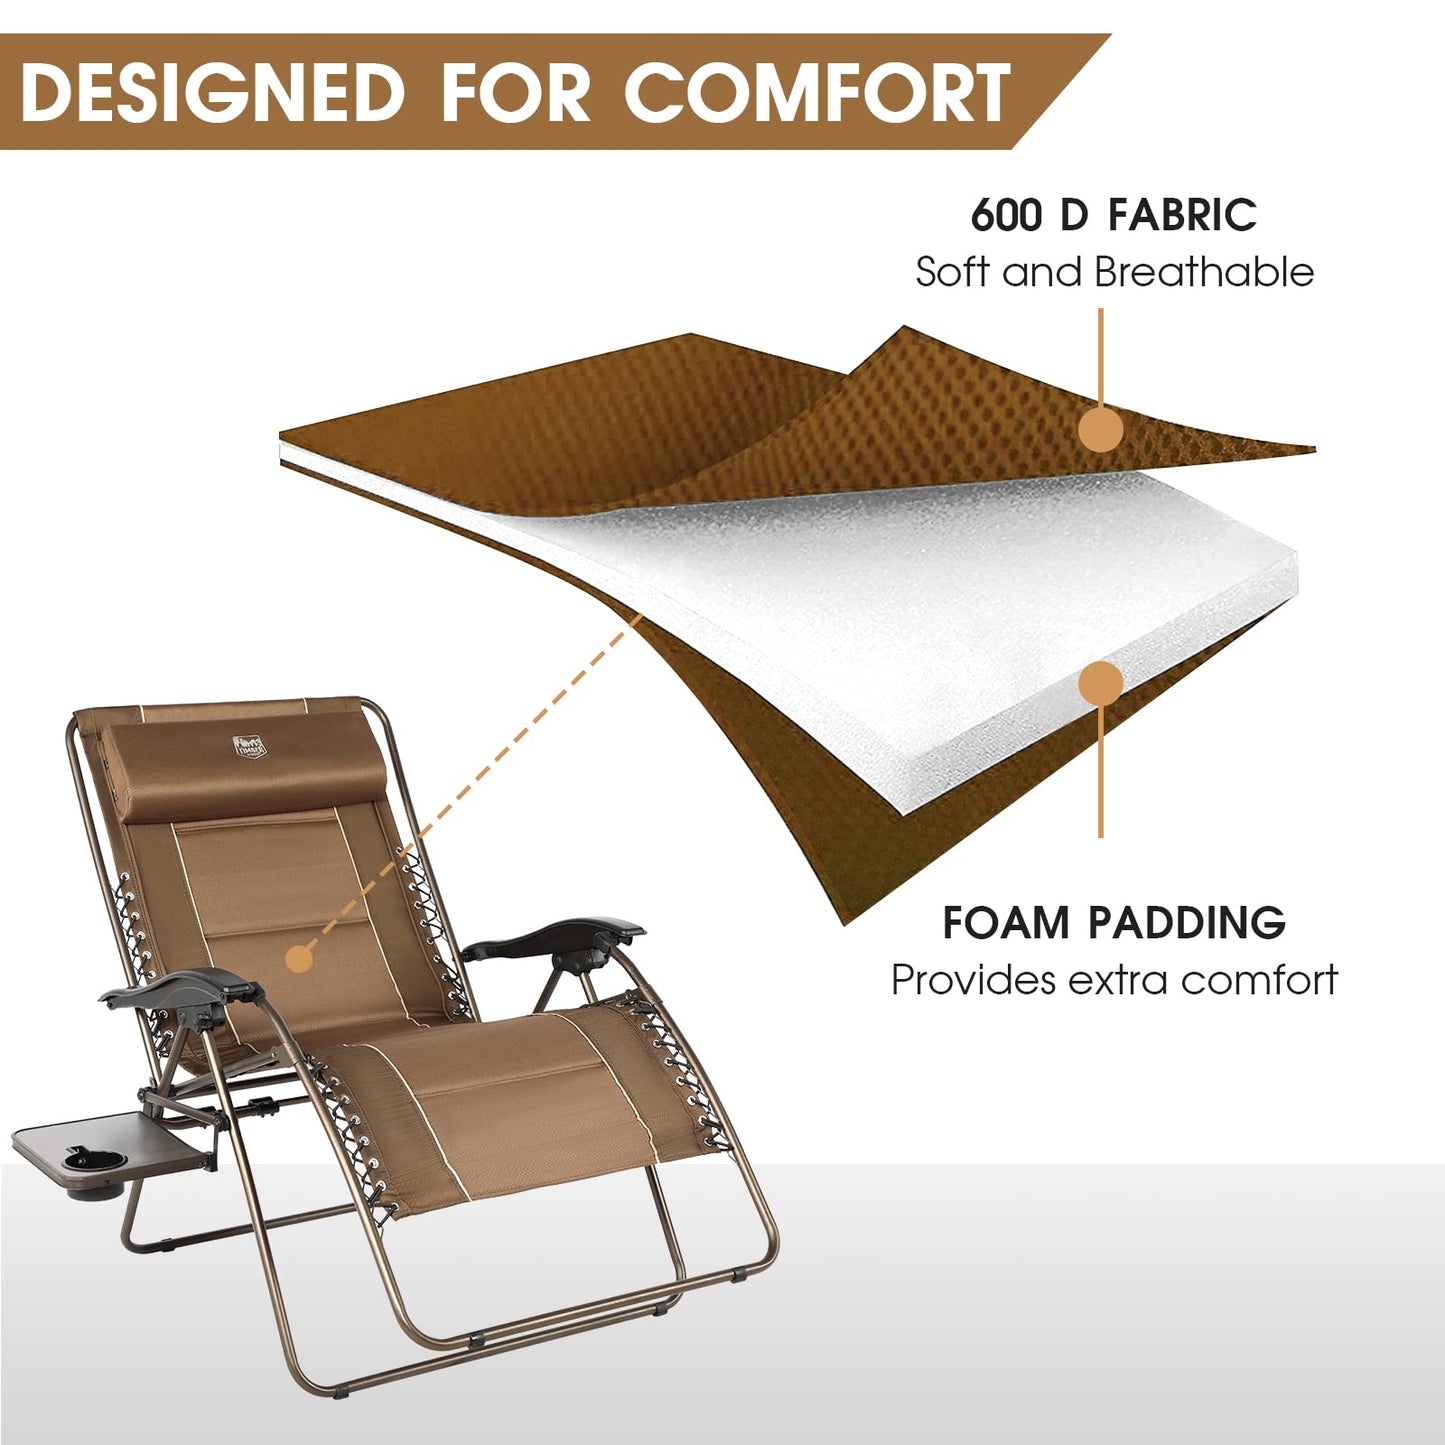 TIMBER RIDGE XXL Oversized Zero Gravity Chair, Full Padded Patio Lounger with Side Table, 33” Wide Reclining Lawn Chair, Support 500lbs (Brown) Brown